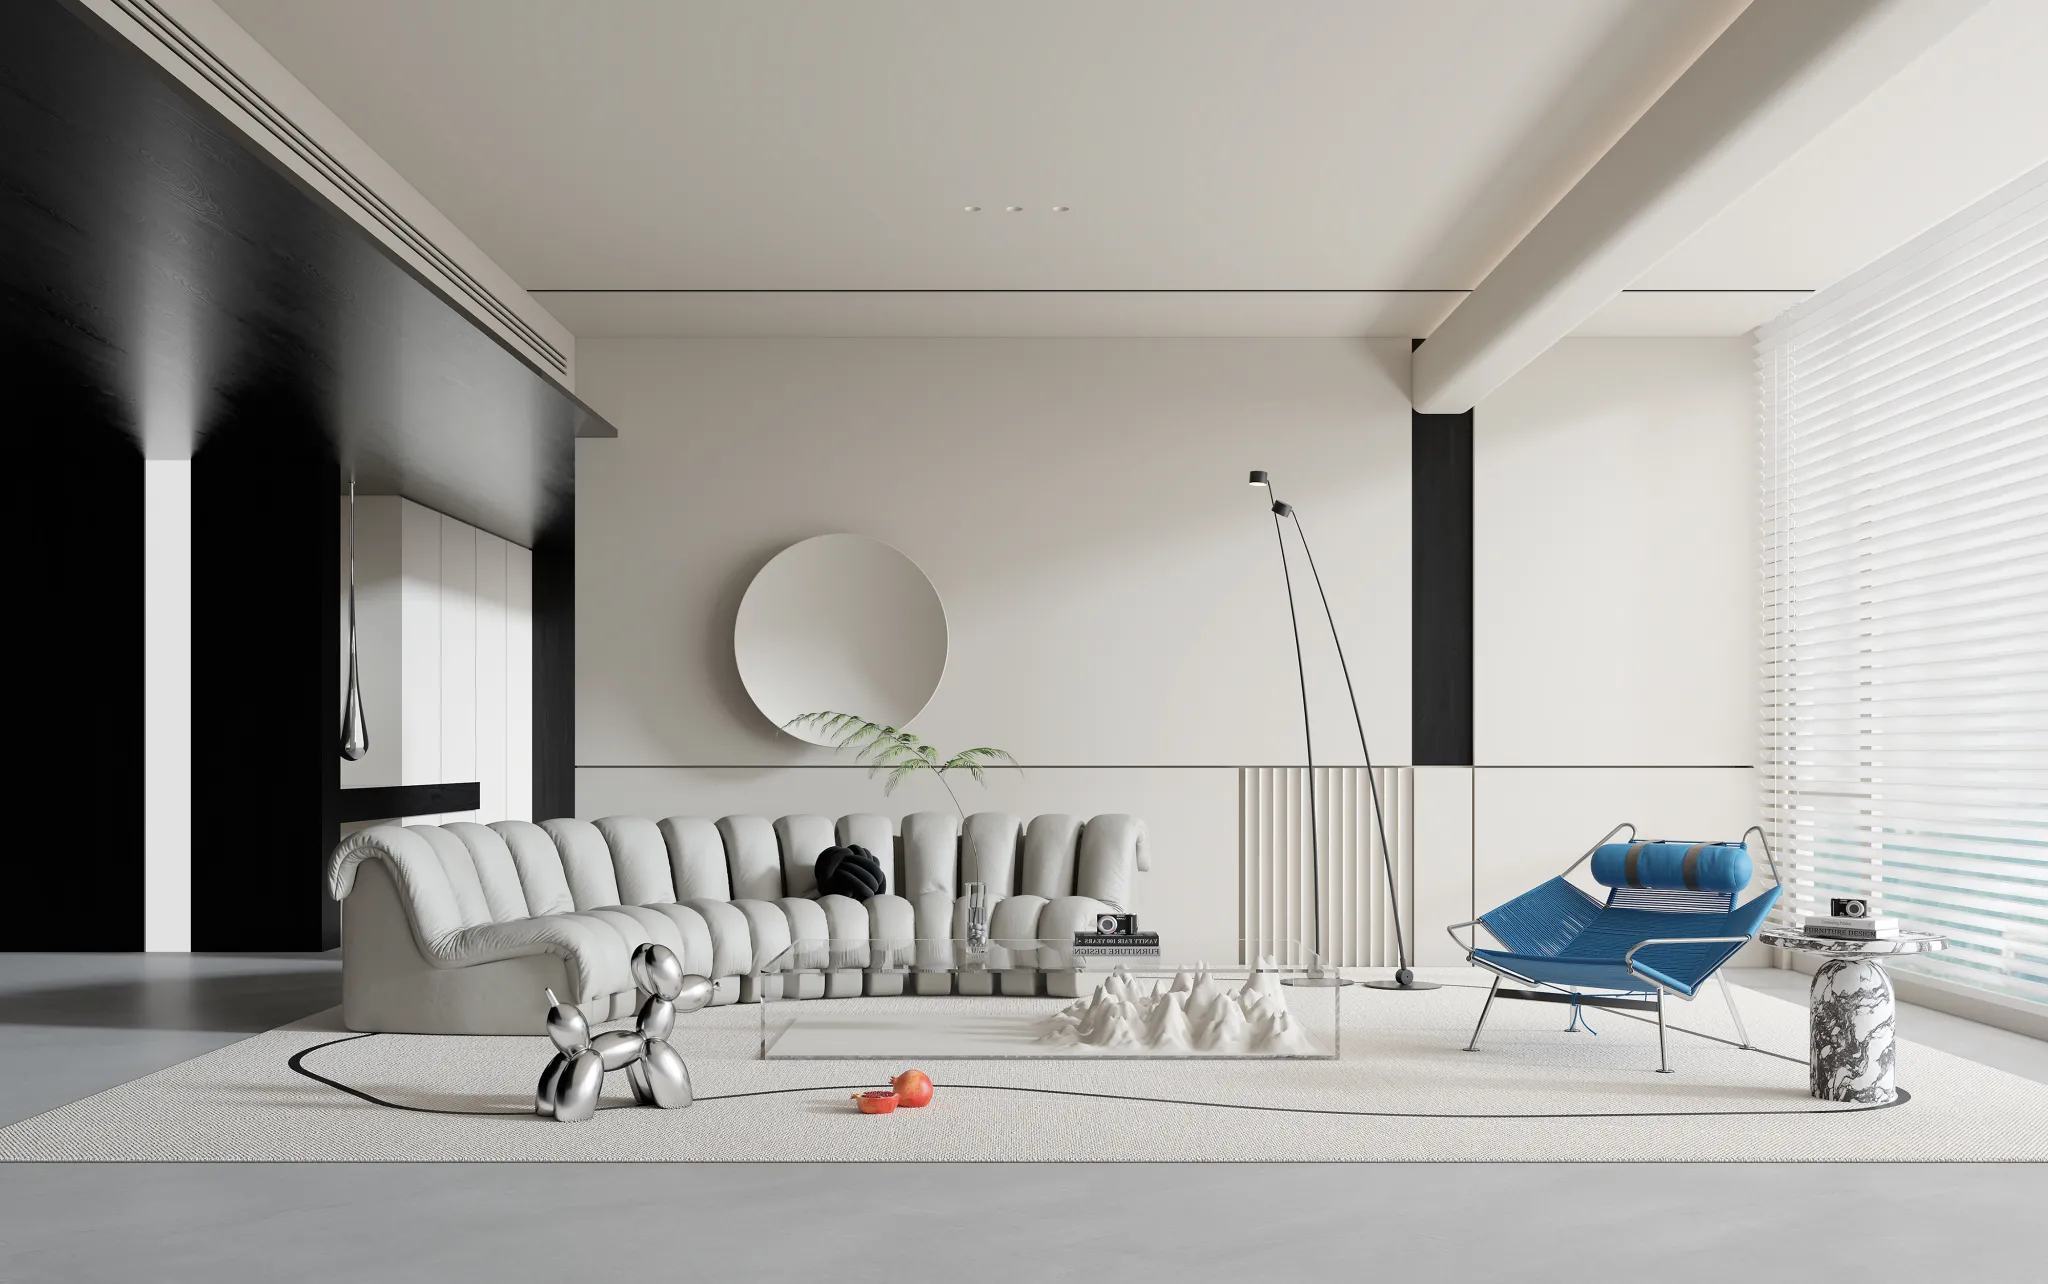 HOUSE SPACE 3D SCENES – LIVING ROOM – 0113